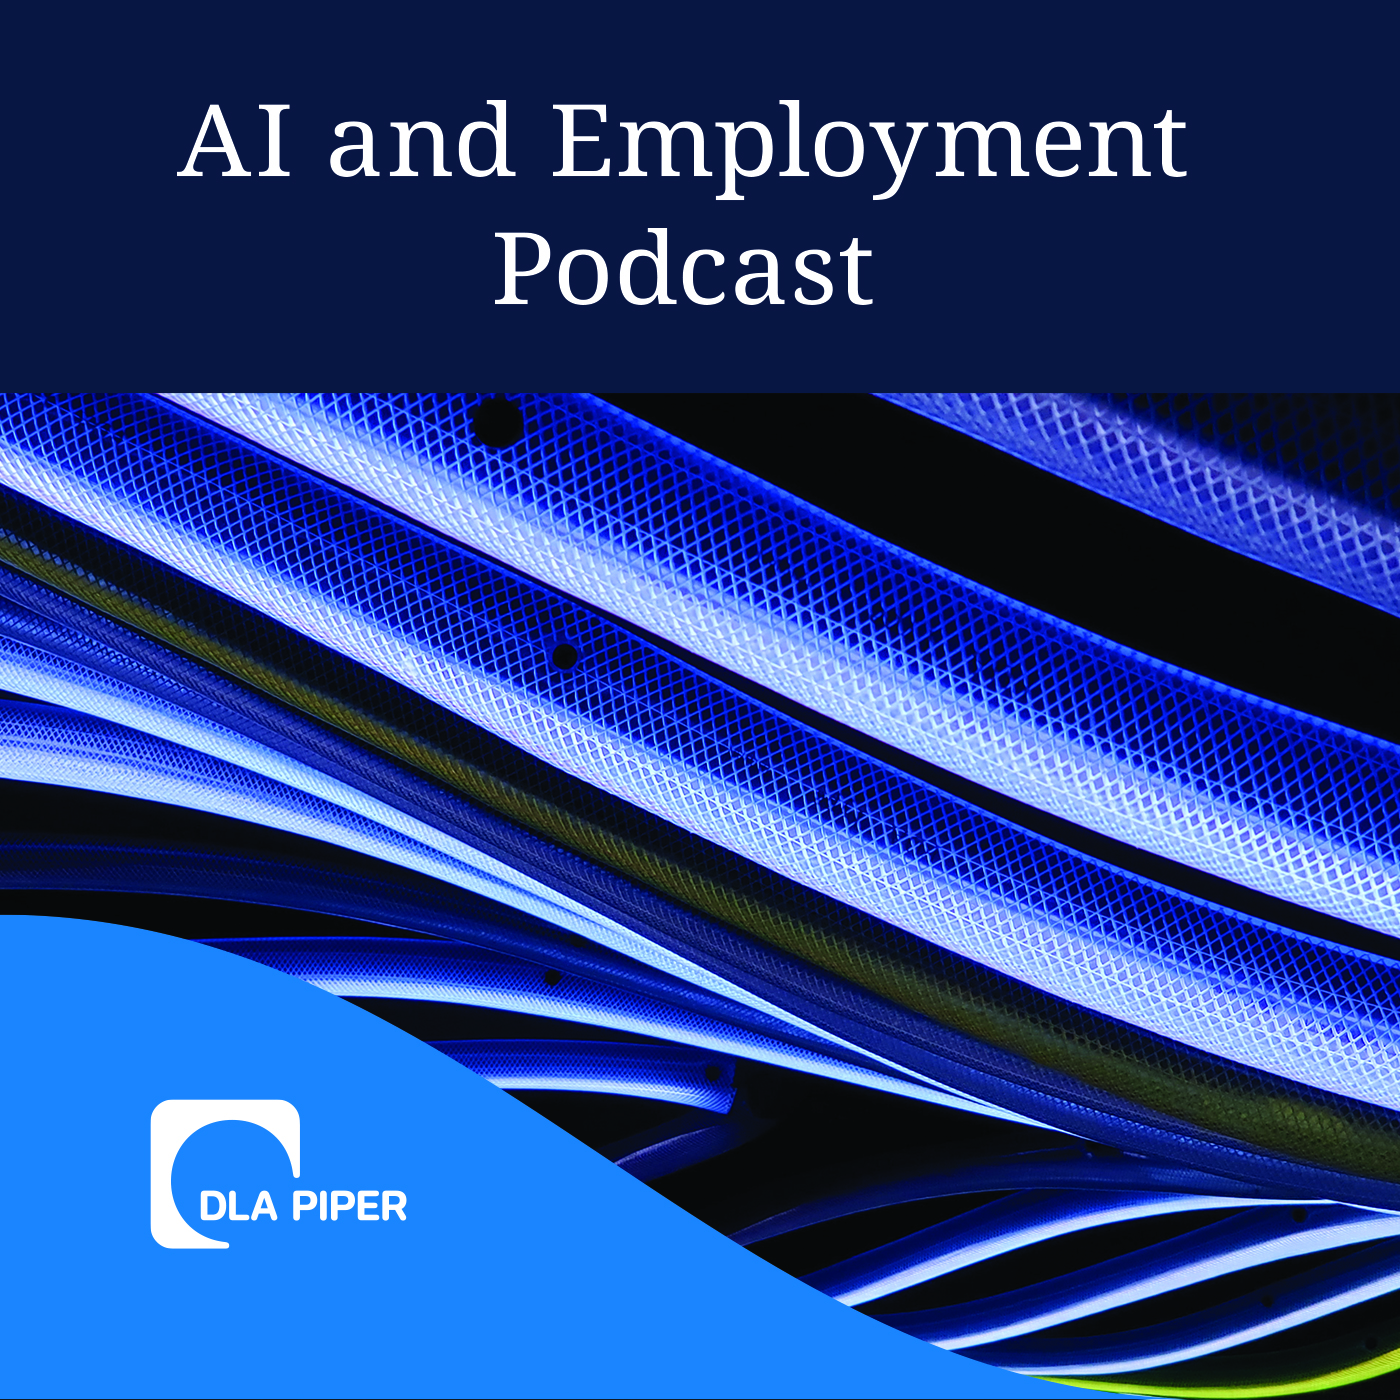 The DLA Piper AI and Employment Podcast